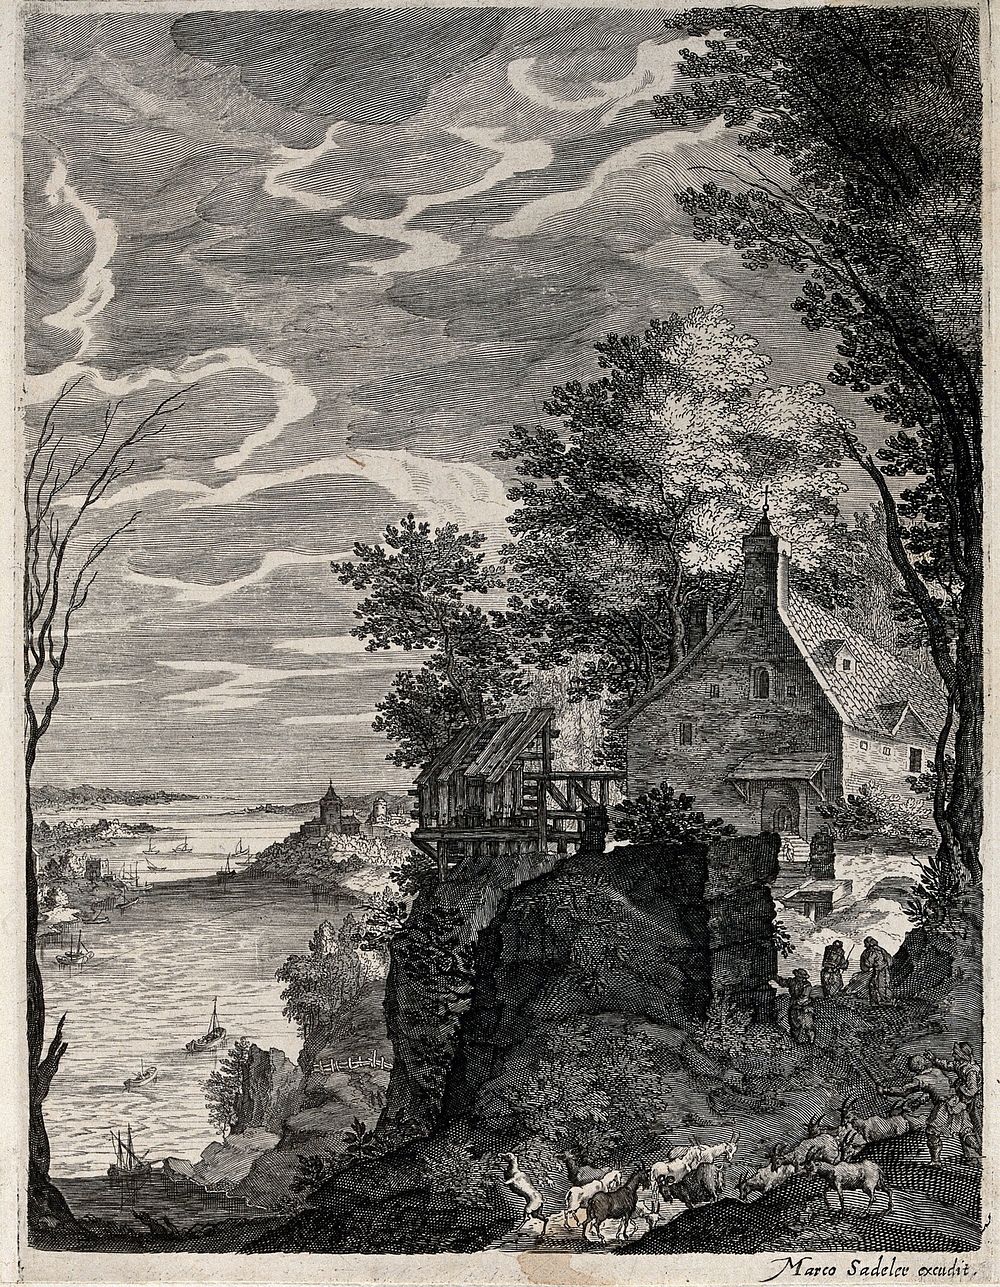 Goatherds driving their flock in a river landscape. Engraving, 16--.